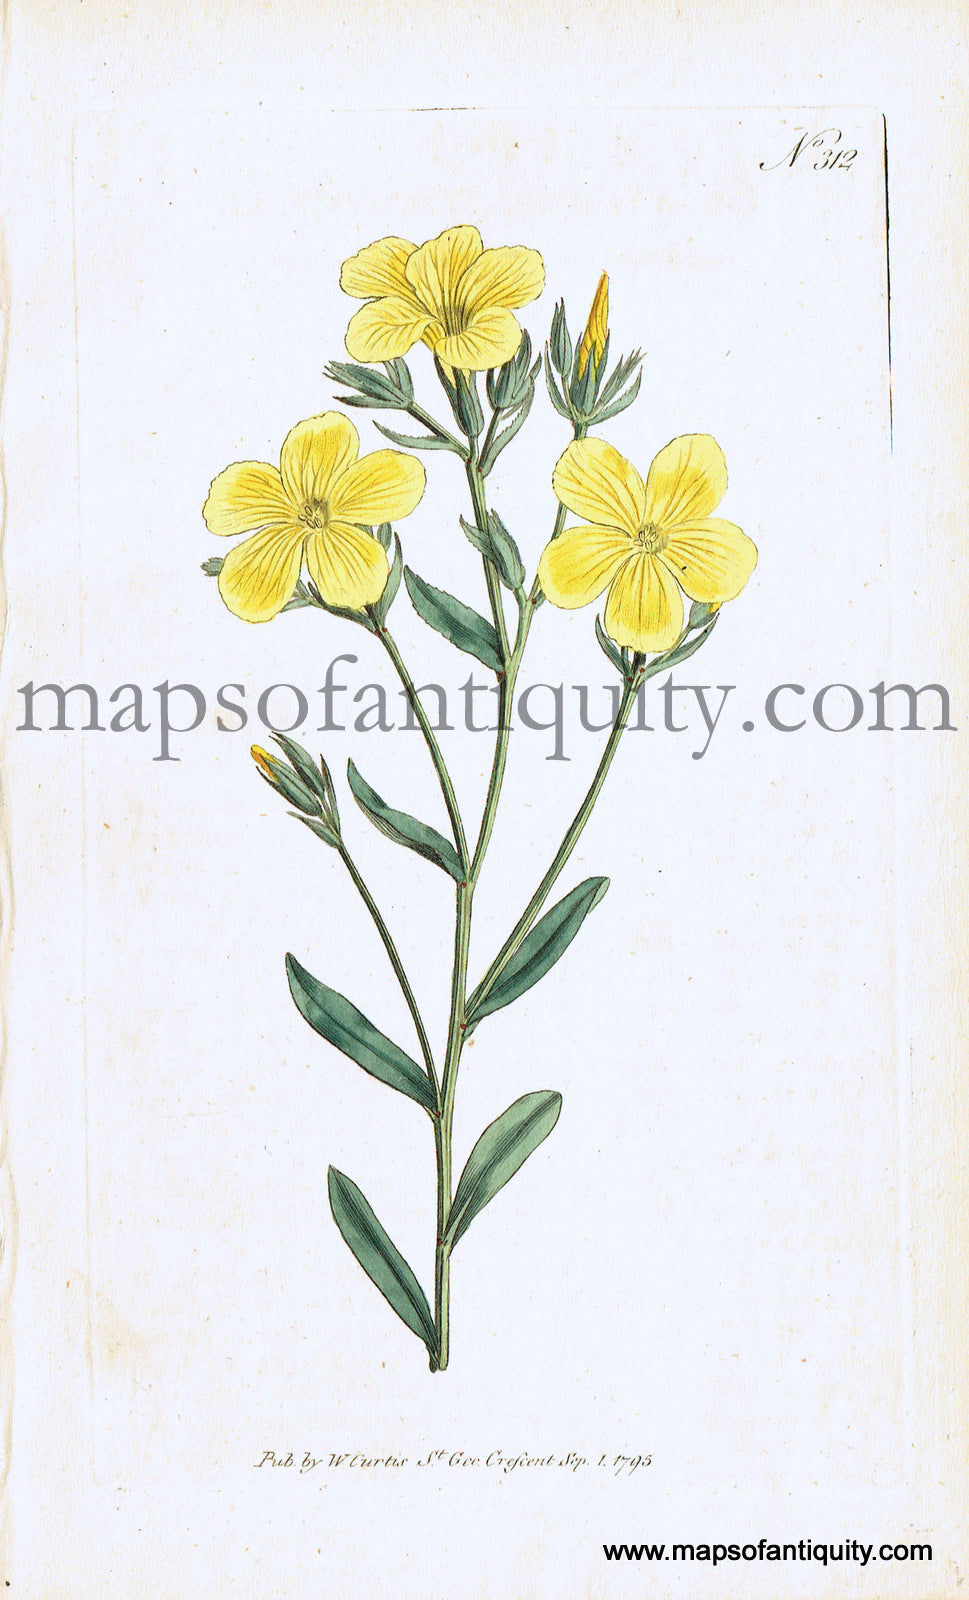 Antique-Hand-Colored-Print-Linum-Flavum--Yellow-Flax-Antique-Prints-Natural-History-Botanical-1795-Curtis-Maps-Of-Antiquity